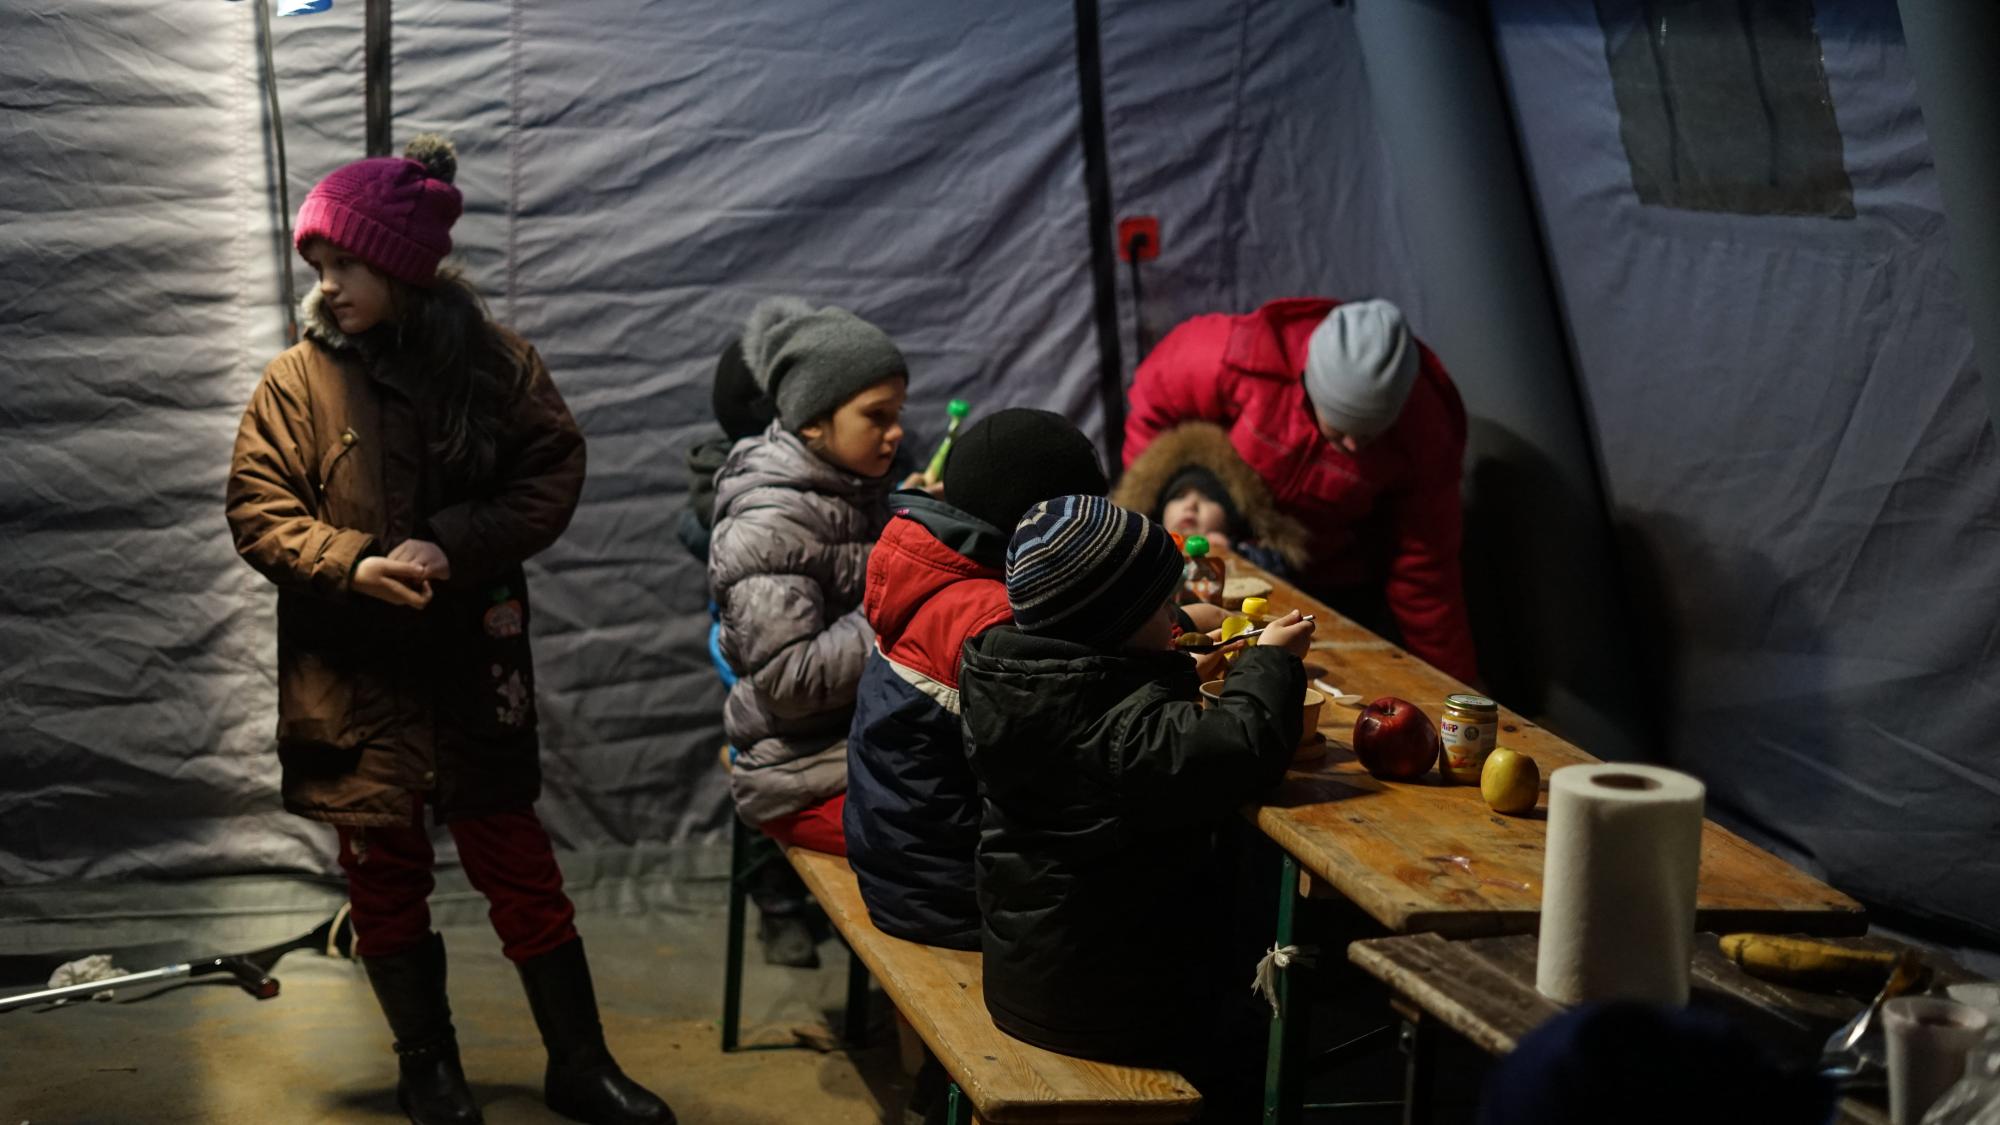 Ukrainian children waiting in a tent at the Polish-Ukrainian border where organisations and volunteers provided some aids. Budomierz, 05.03.2022, Photo: Milad Amin